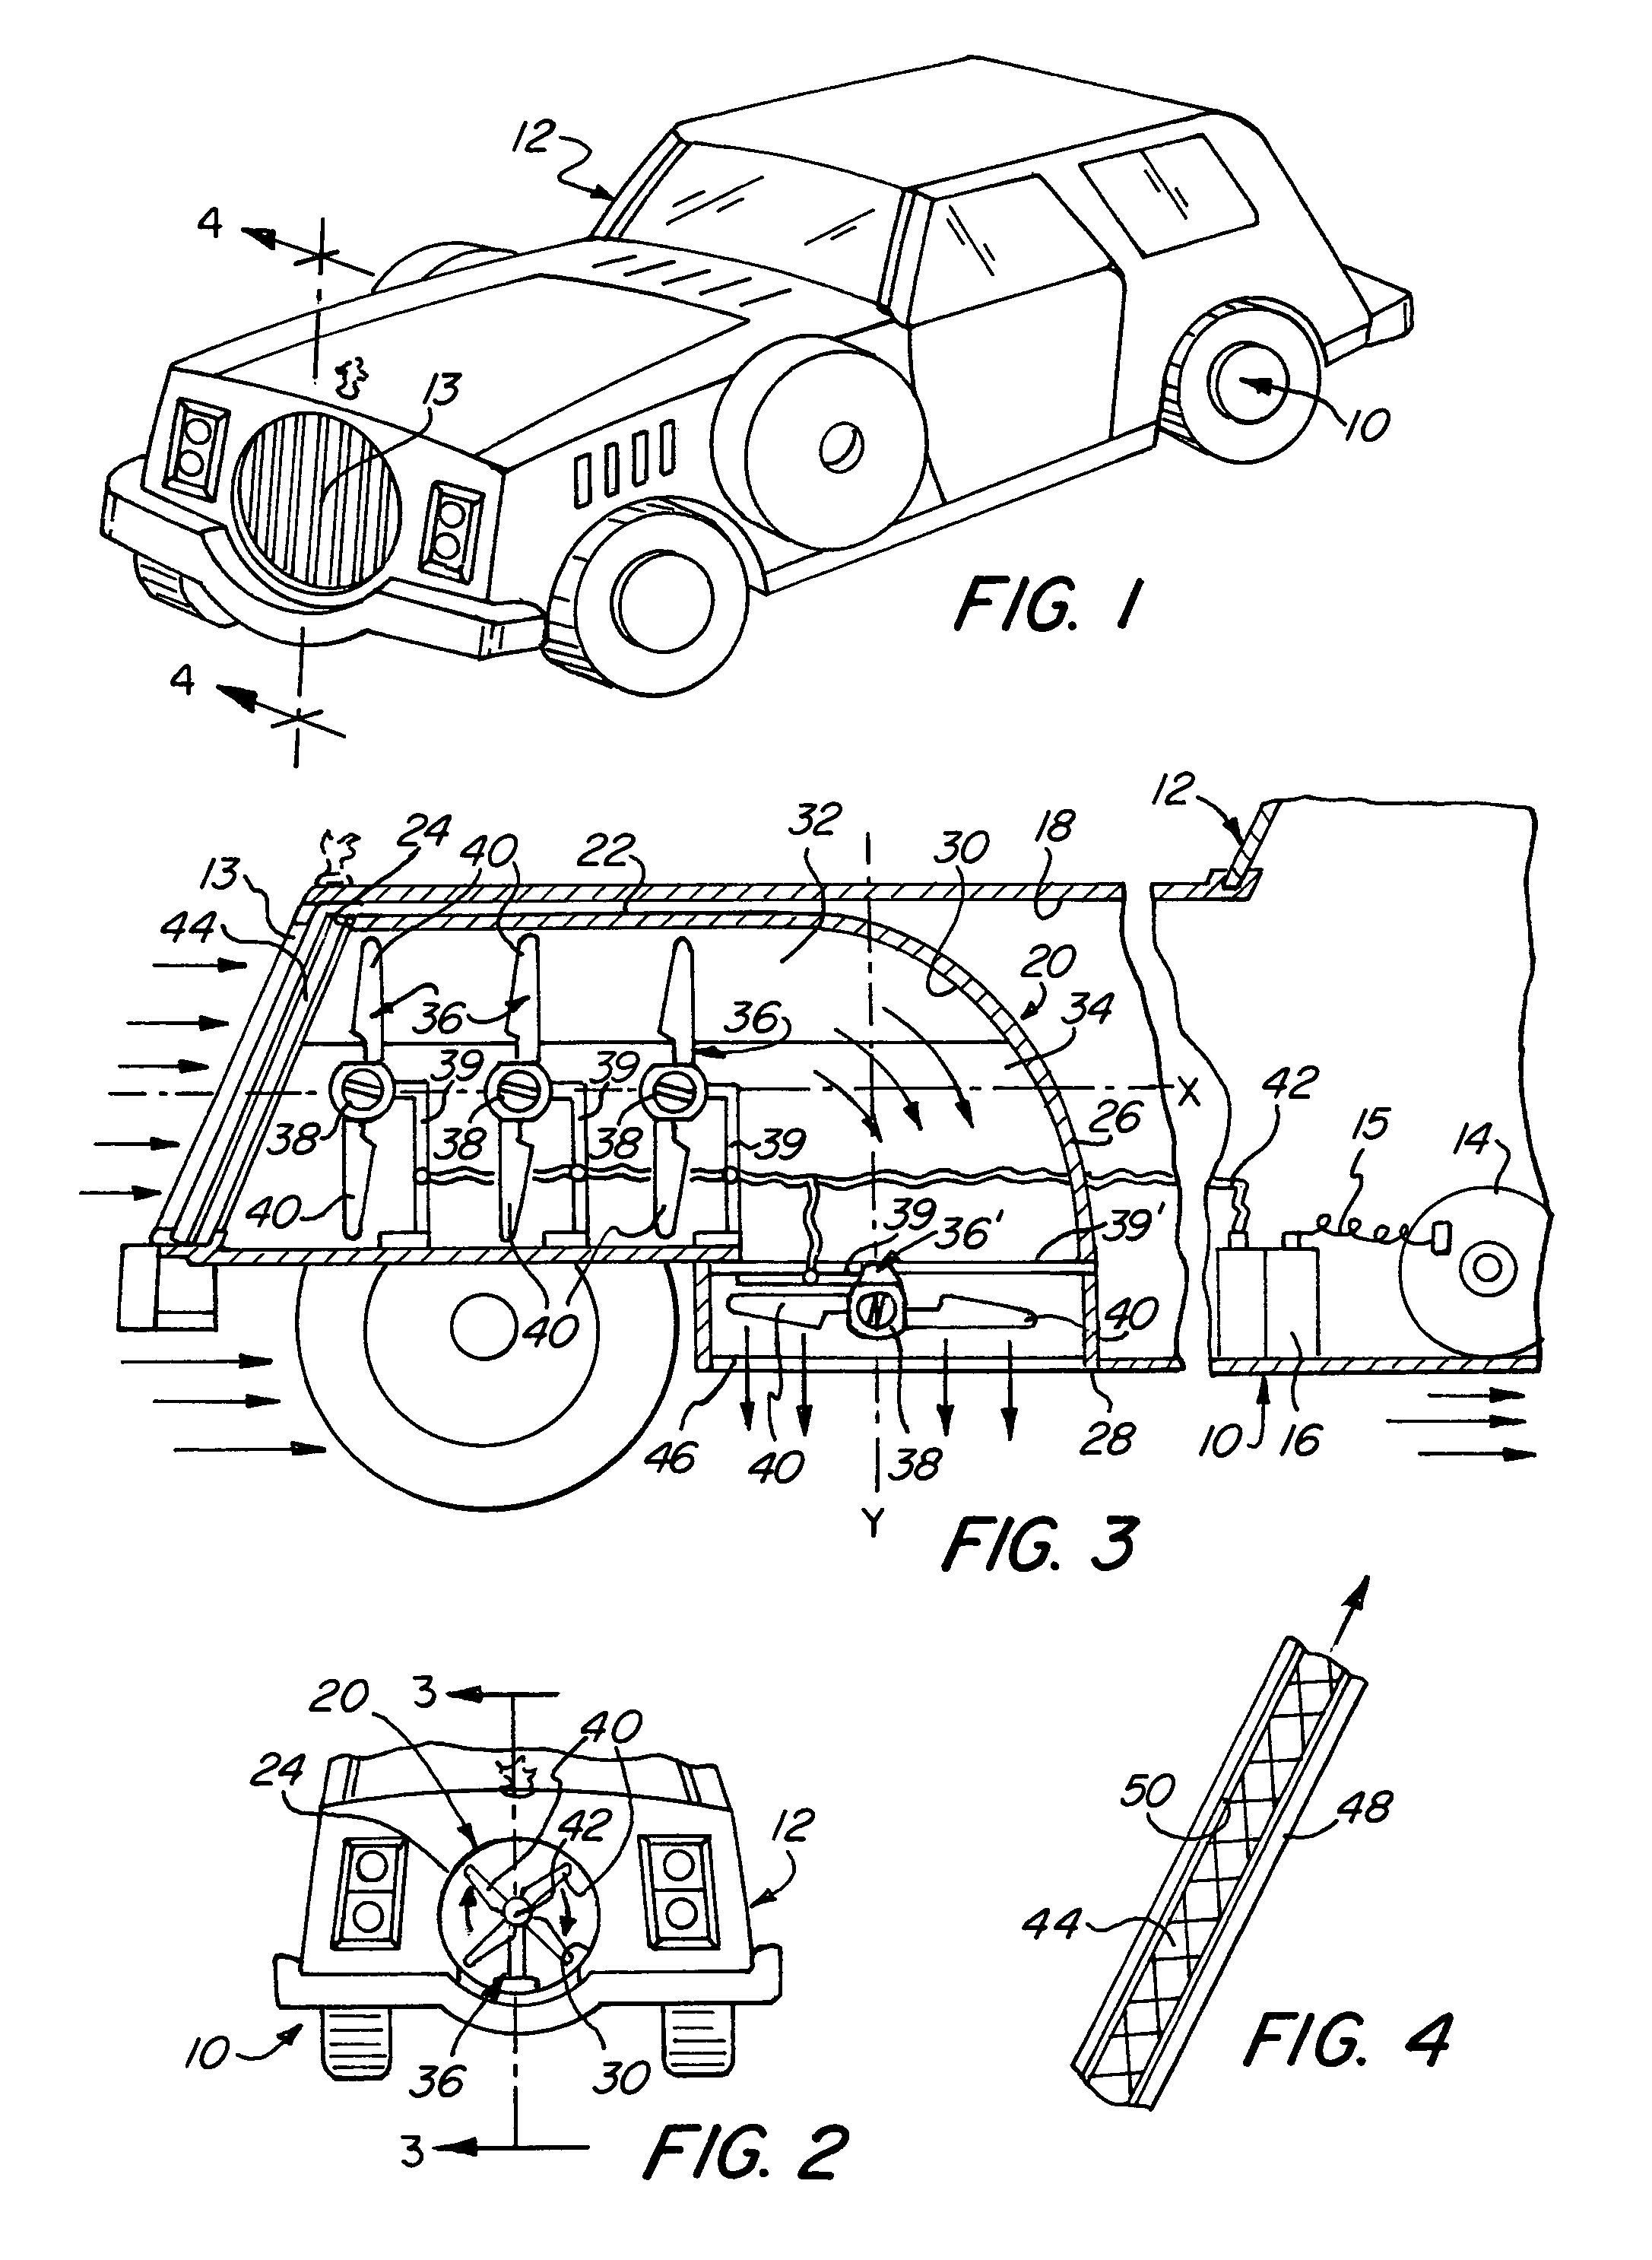 Recharging system for electrically powered vehicle, and vehicle incorporating same